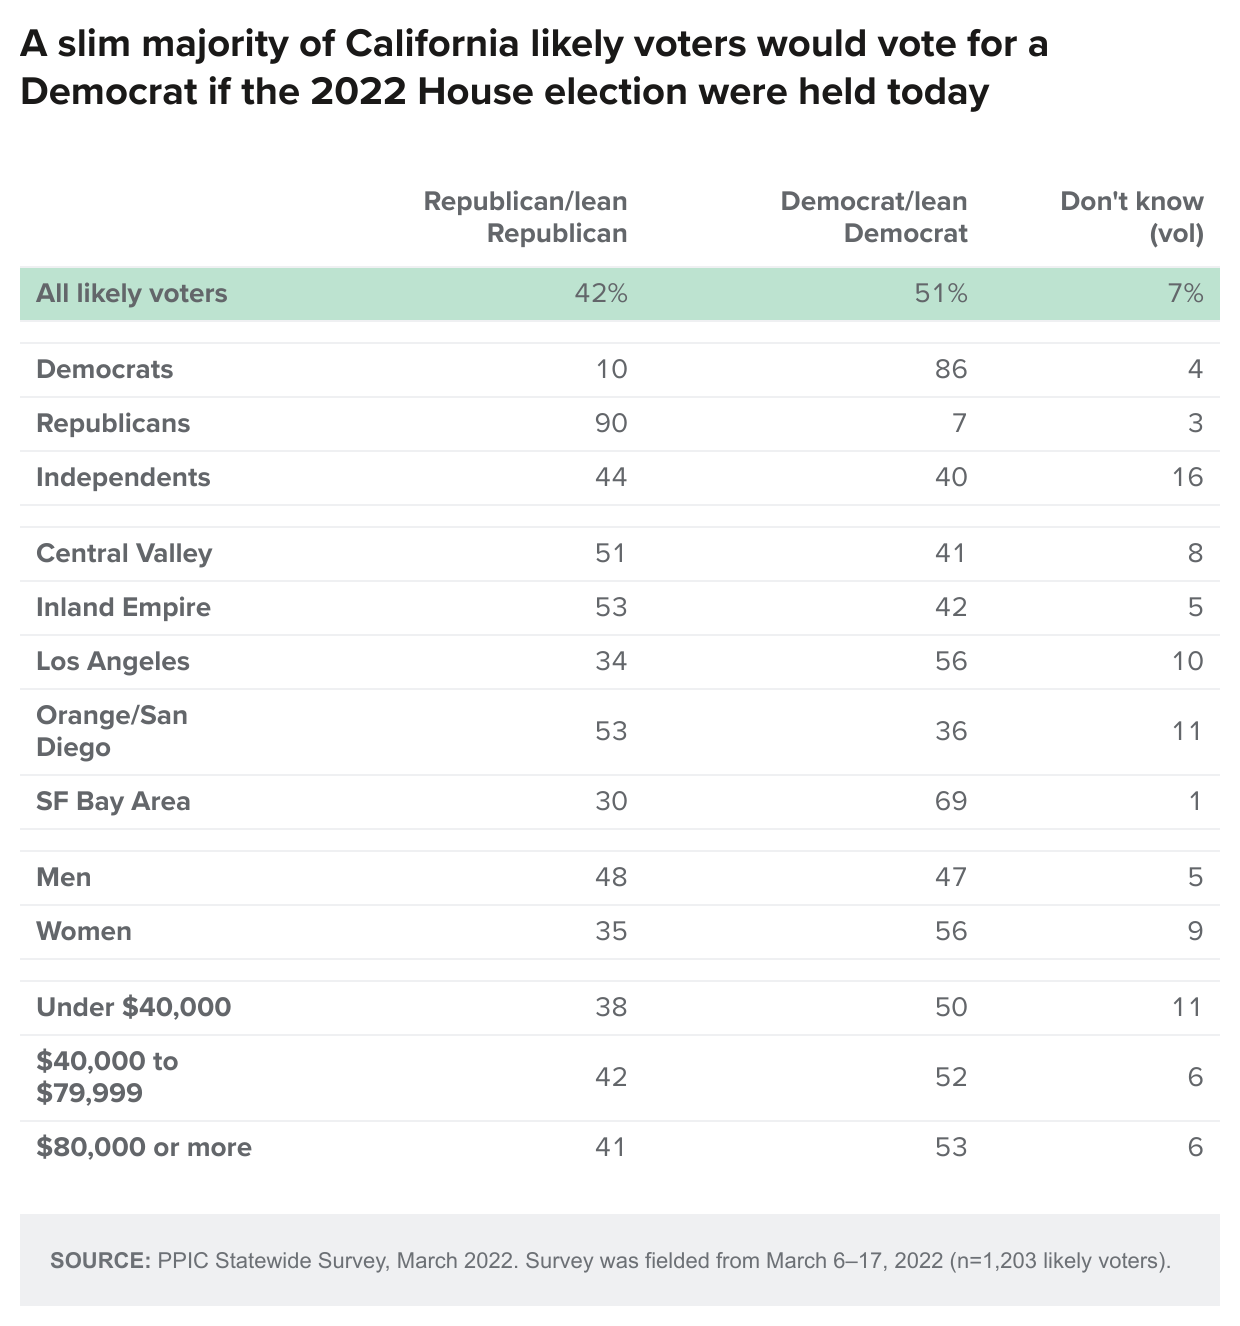 table - A slim majority of California likely voters would vote for a Democrat if the 2022 House election were held today